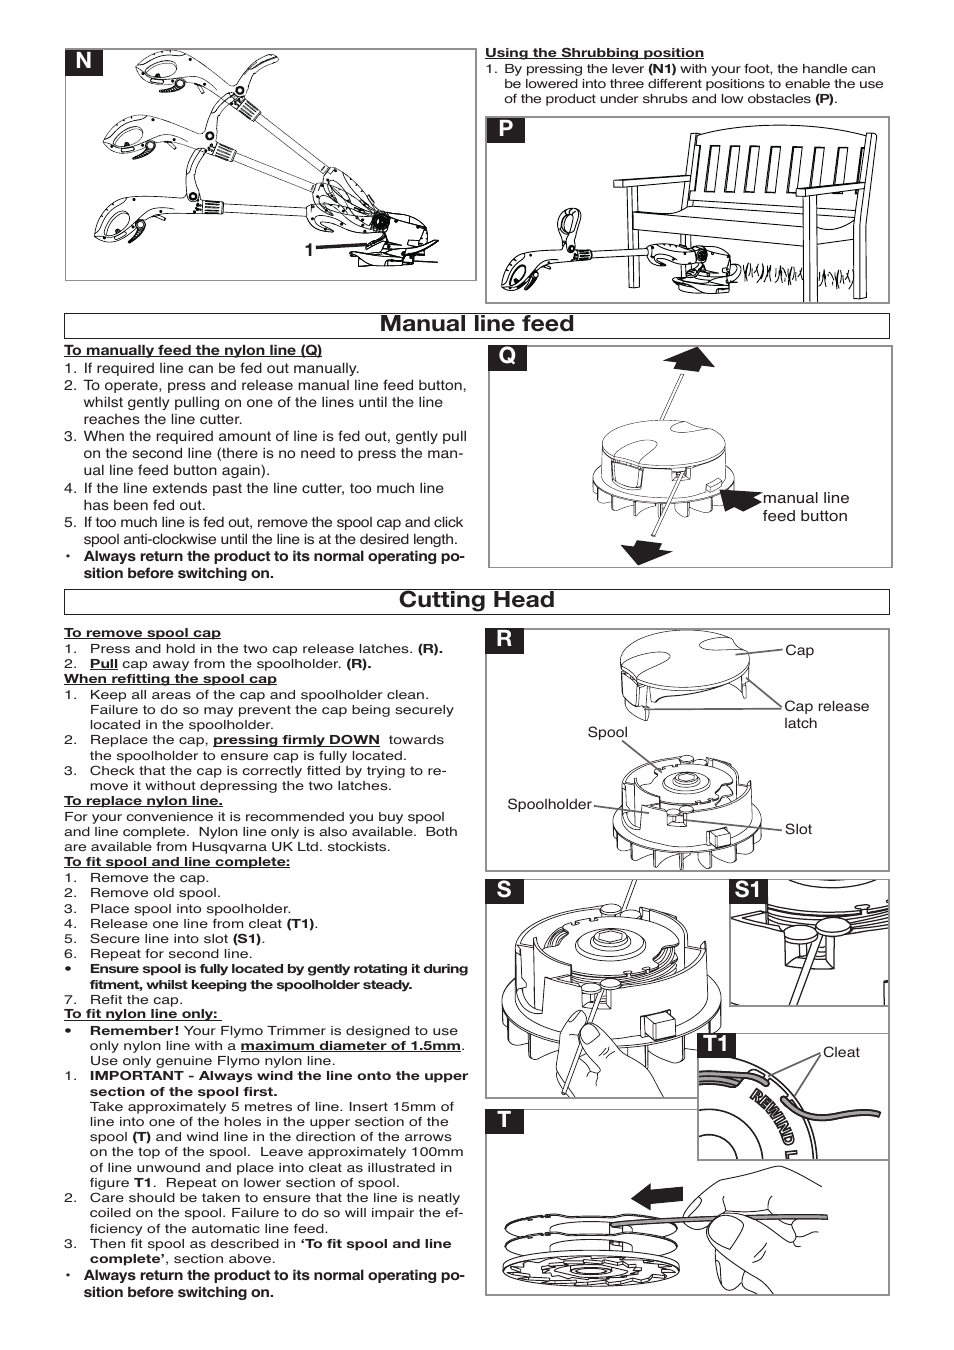 Manual line feed, Rs T1 s1 cutting head | Flymo POWER TRIM 500 XT User Manual | Page 6 / 9